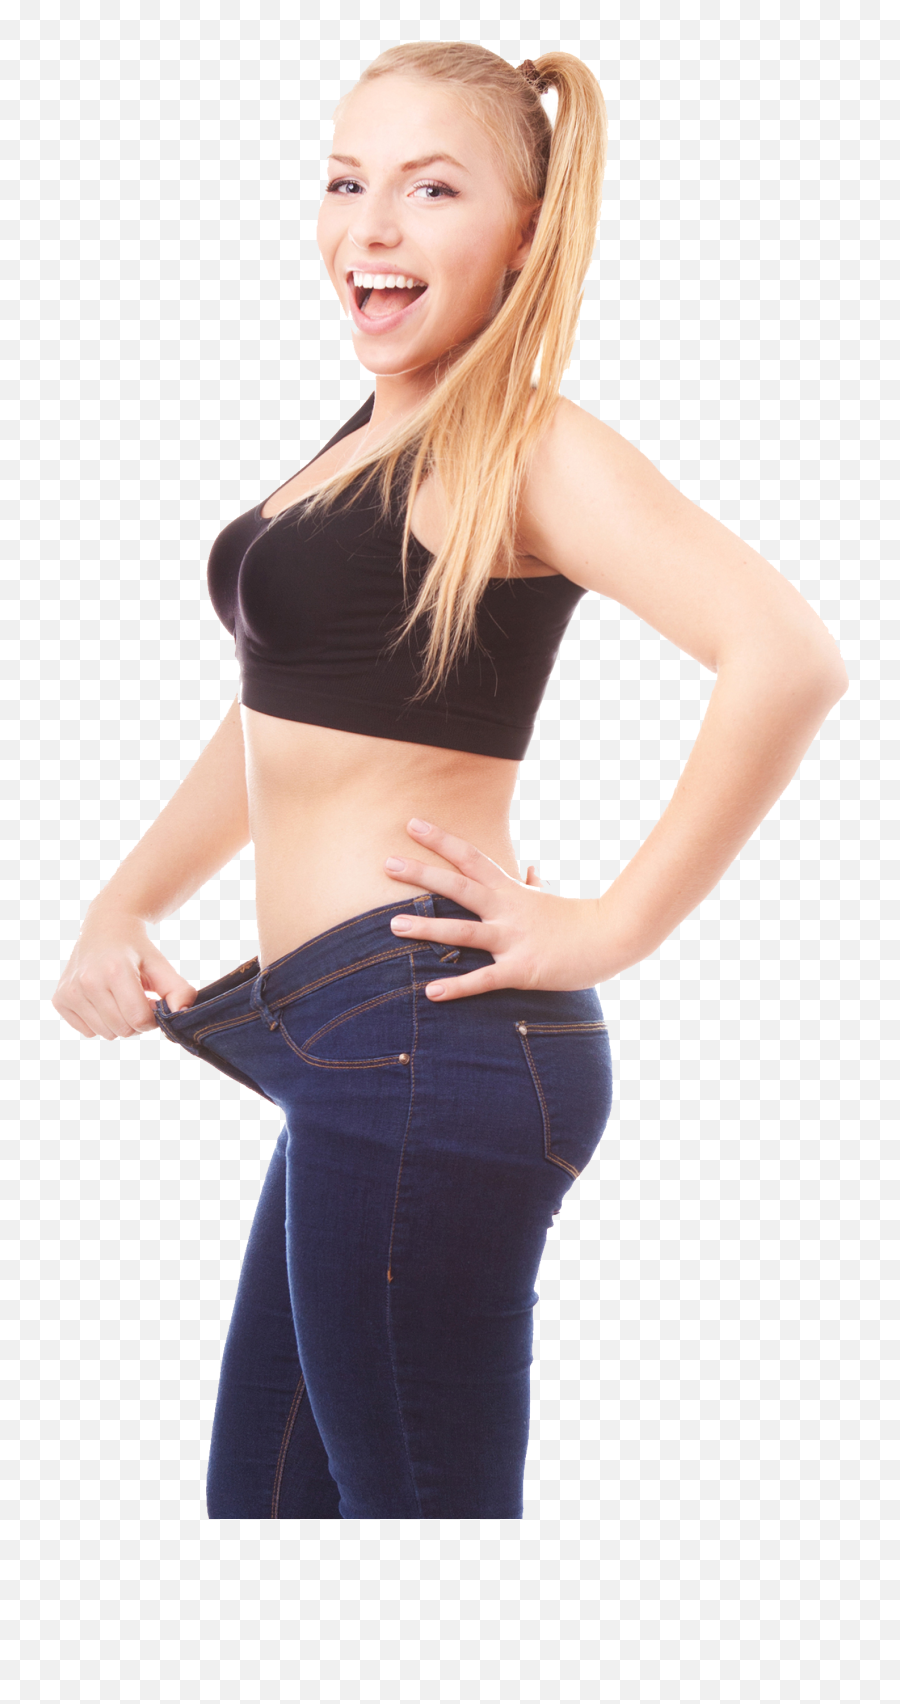 Weight Loss Png Transparent Images Png All - Weight Loss Image Png Emoji,Weight Png